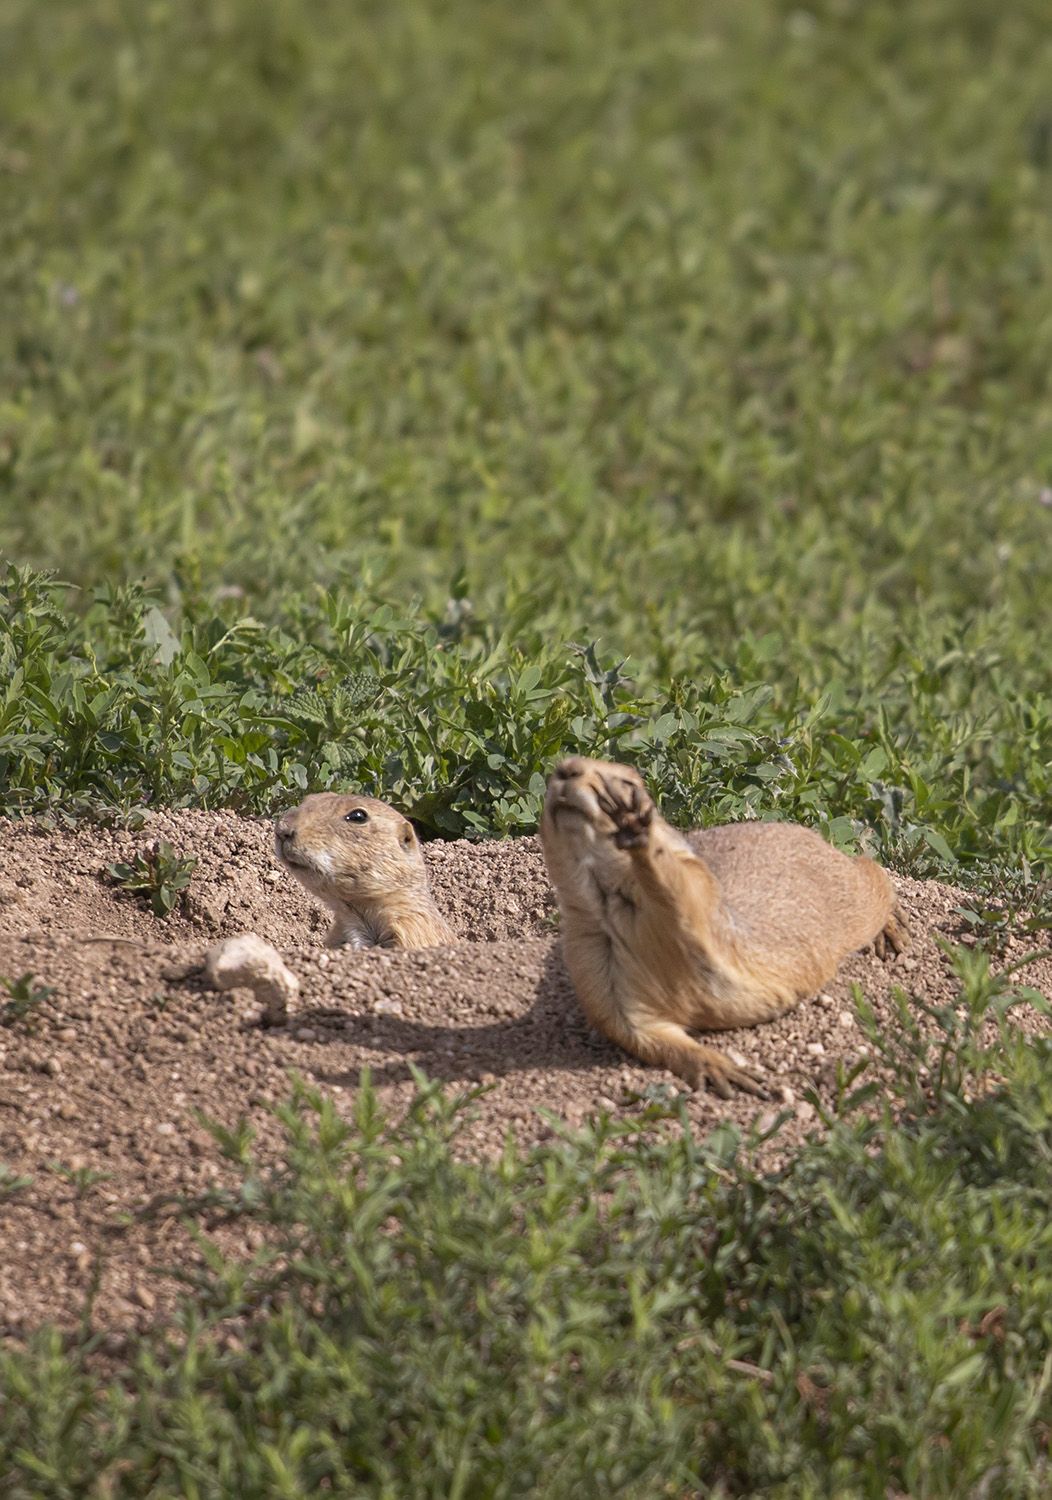 Even though my photo turned out blurry, I got a kick out of this overly dramatic prairie dog.